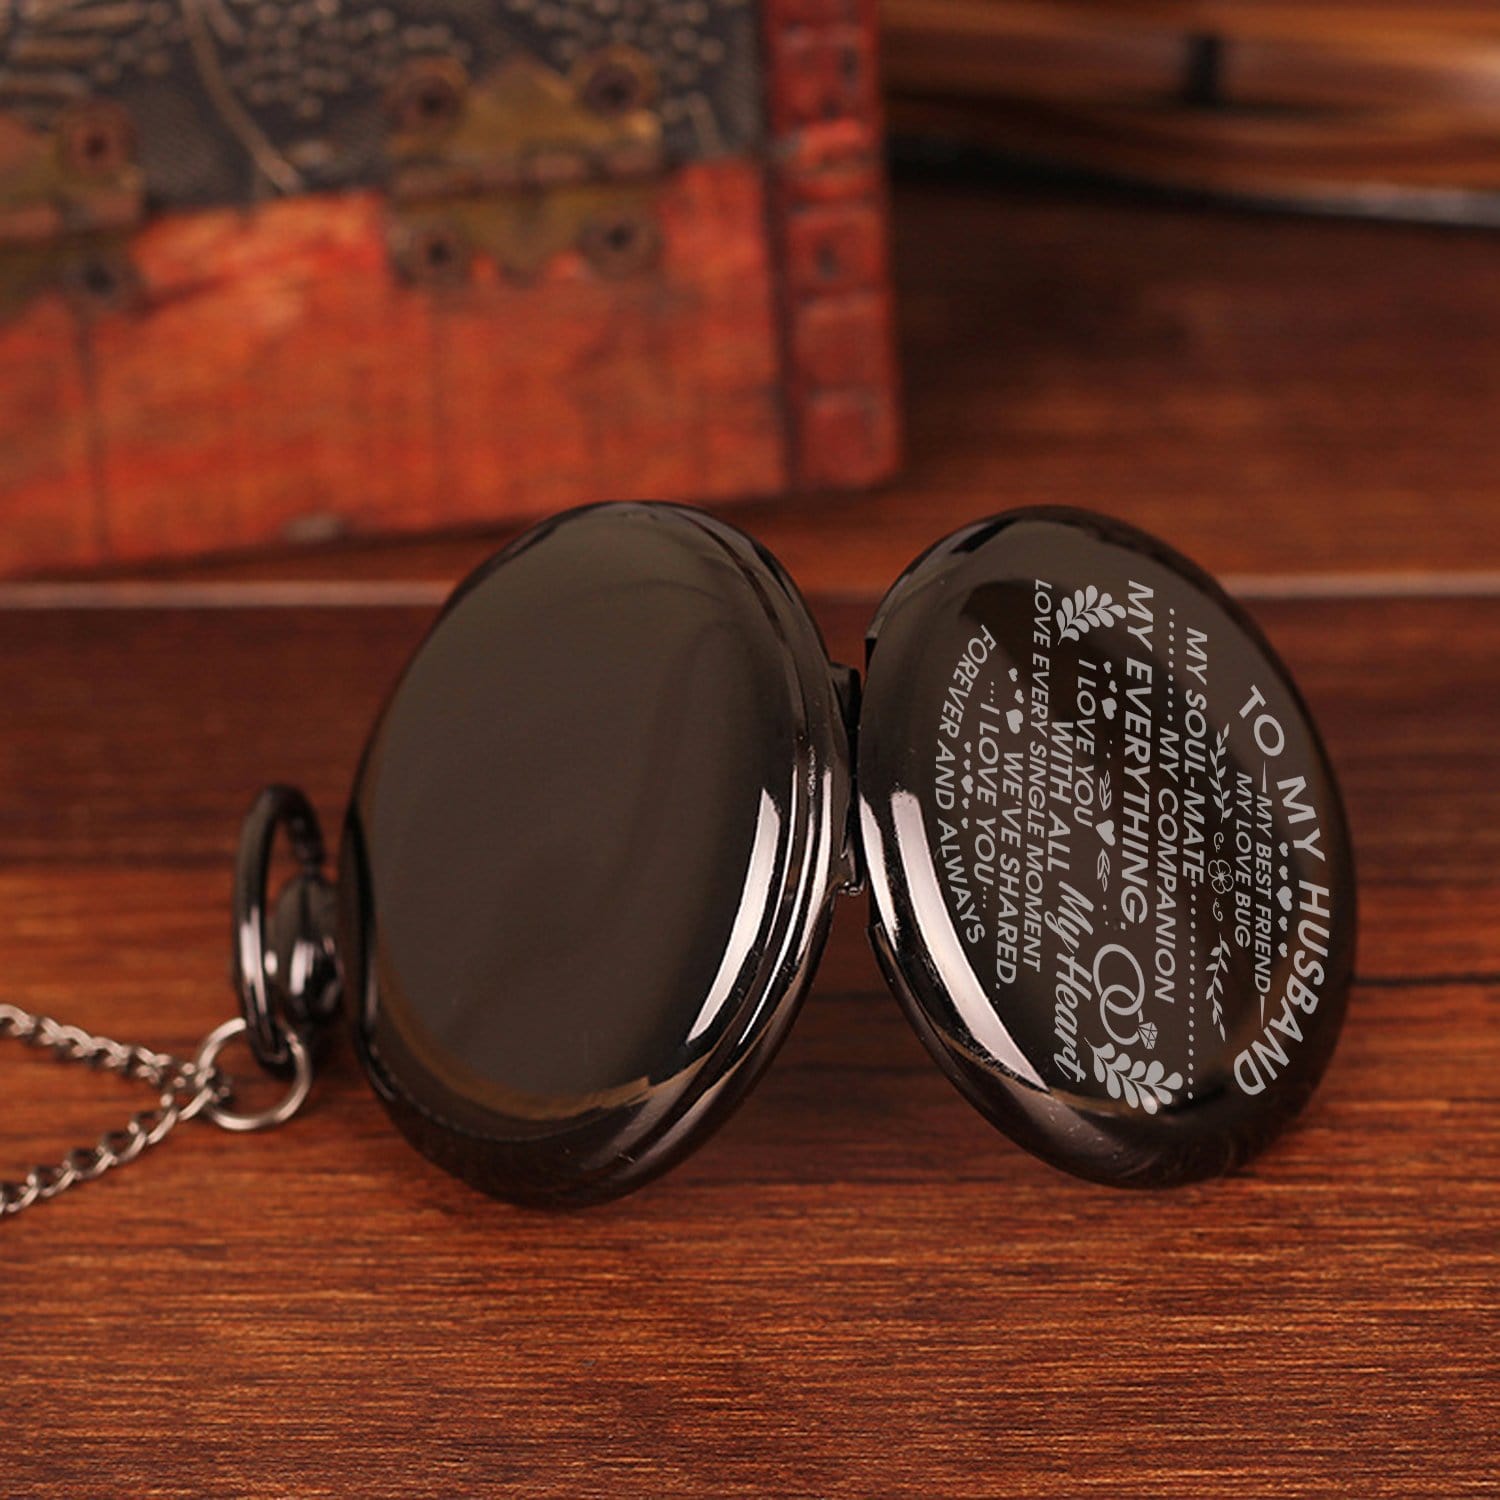 Pocket Watches To My Husband - I Love You With All My Heart Pocket Watch GiveMe-Gifts